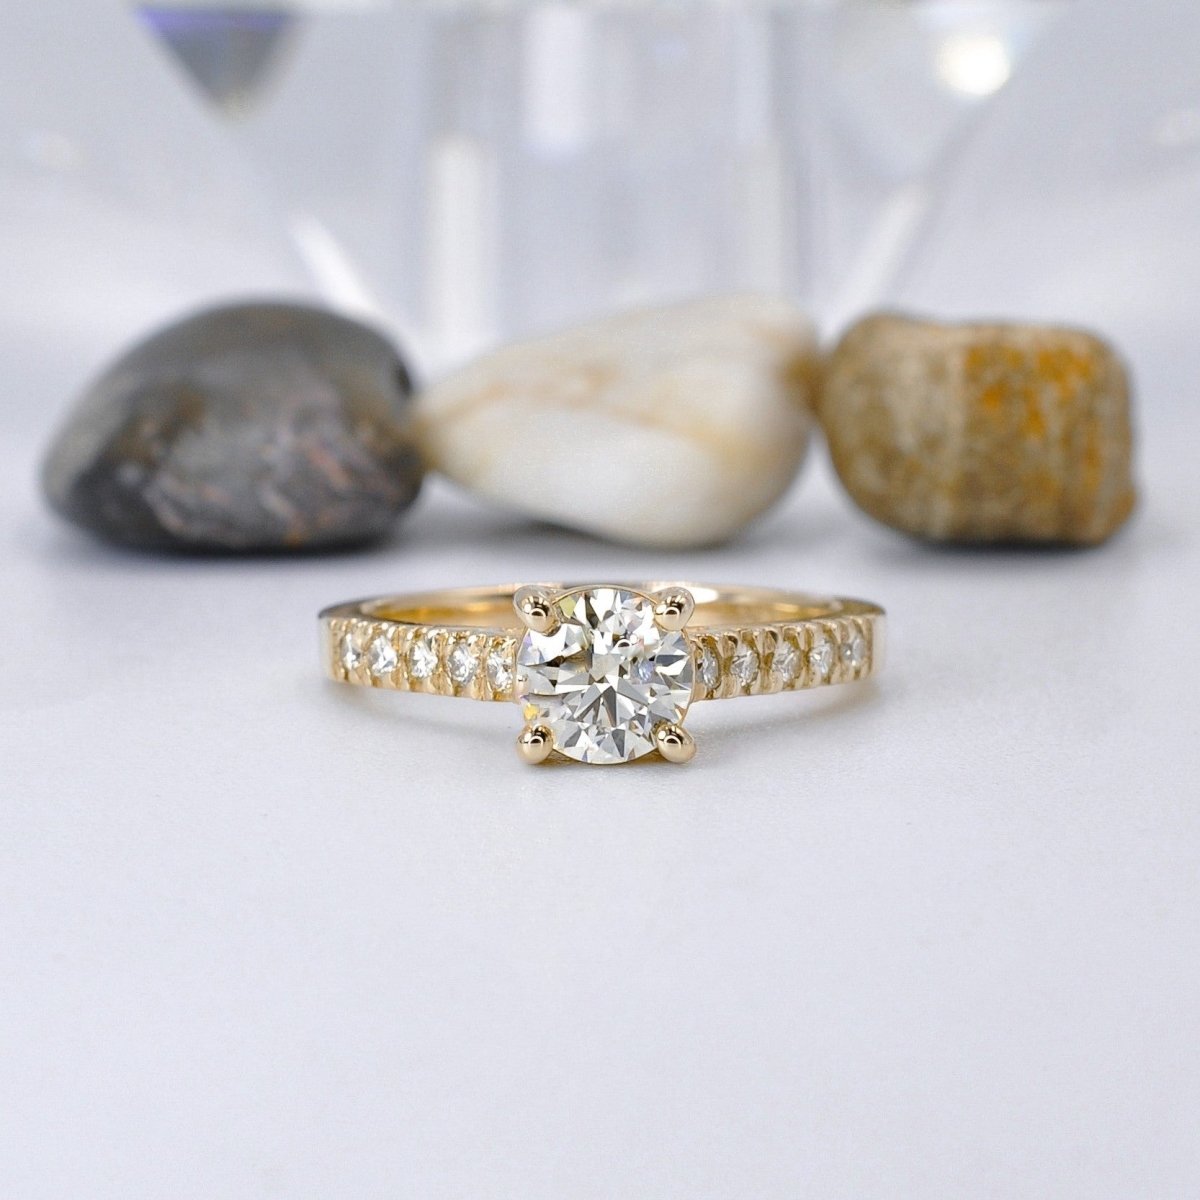 Prestige 1.05CT Round Cut Diamond Engagement Ring in 14KT Yellow Gold - Primestyle.com